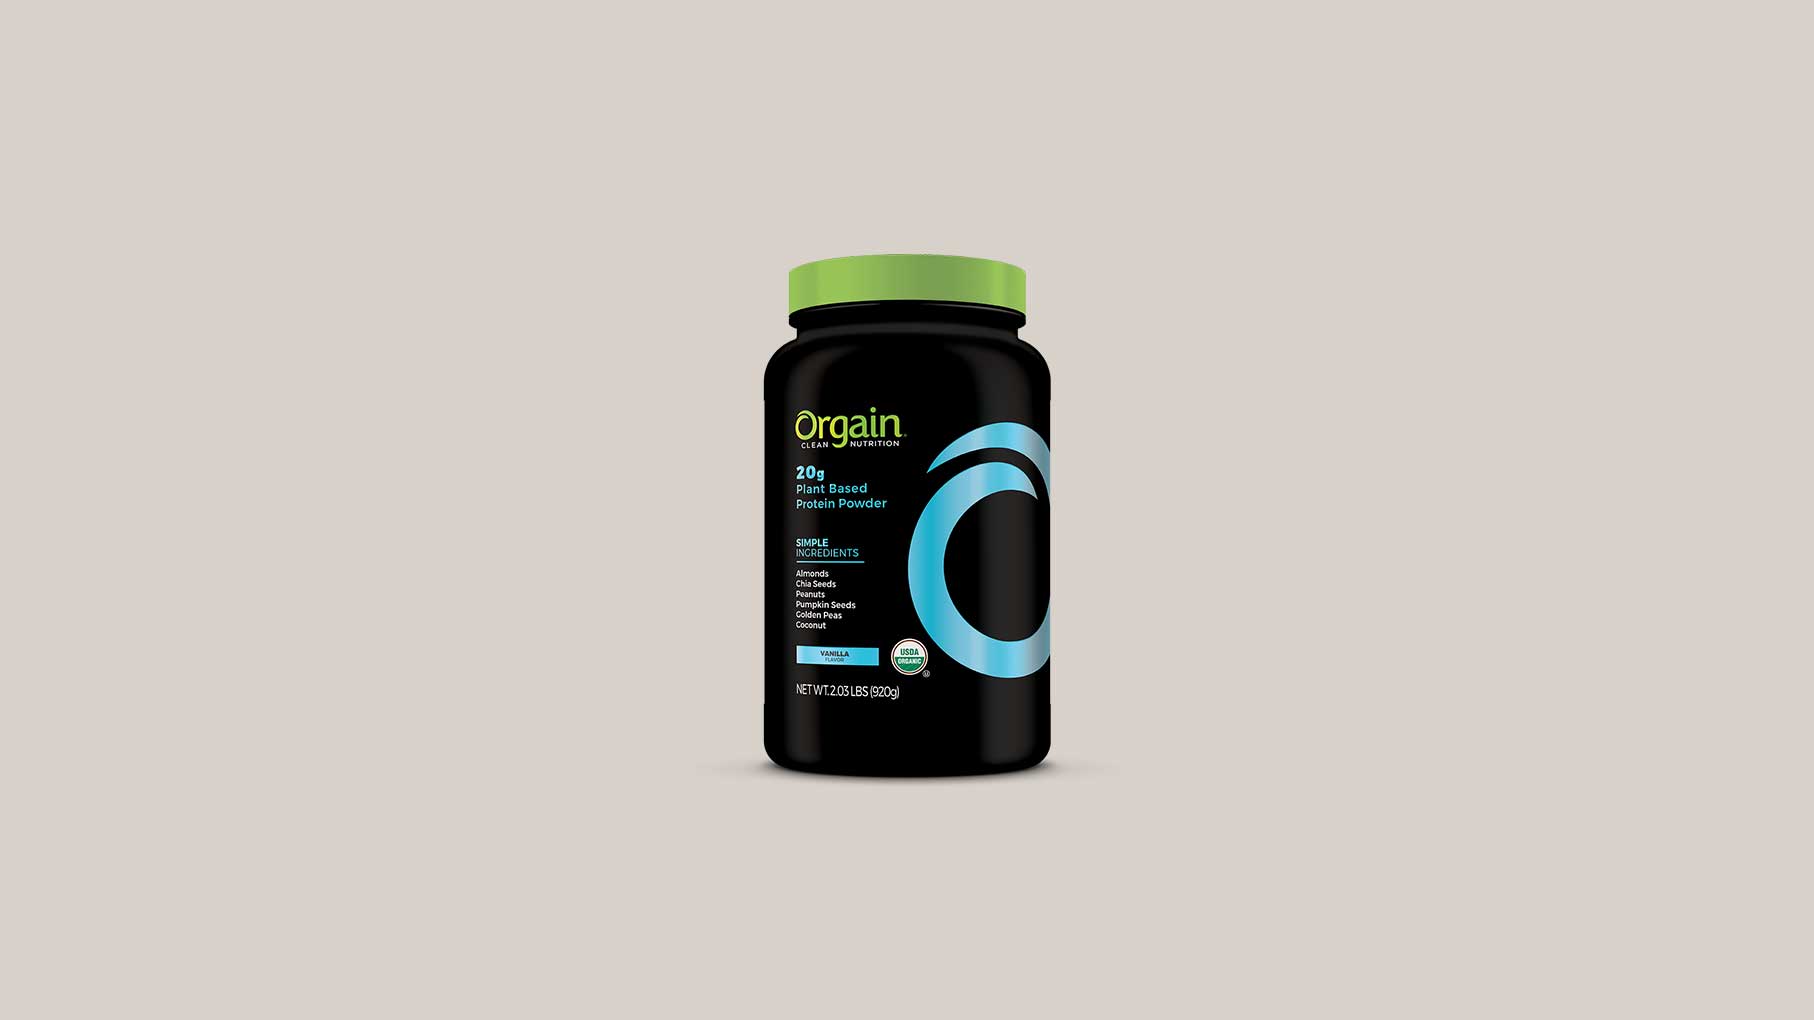 A black container of Orgain Organic Protein is displayed against a pale grey background. The container has a green lid and features blue design elements, with text indicating it is a 2 lb plant-based protein powder.